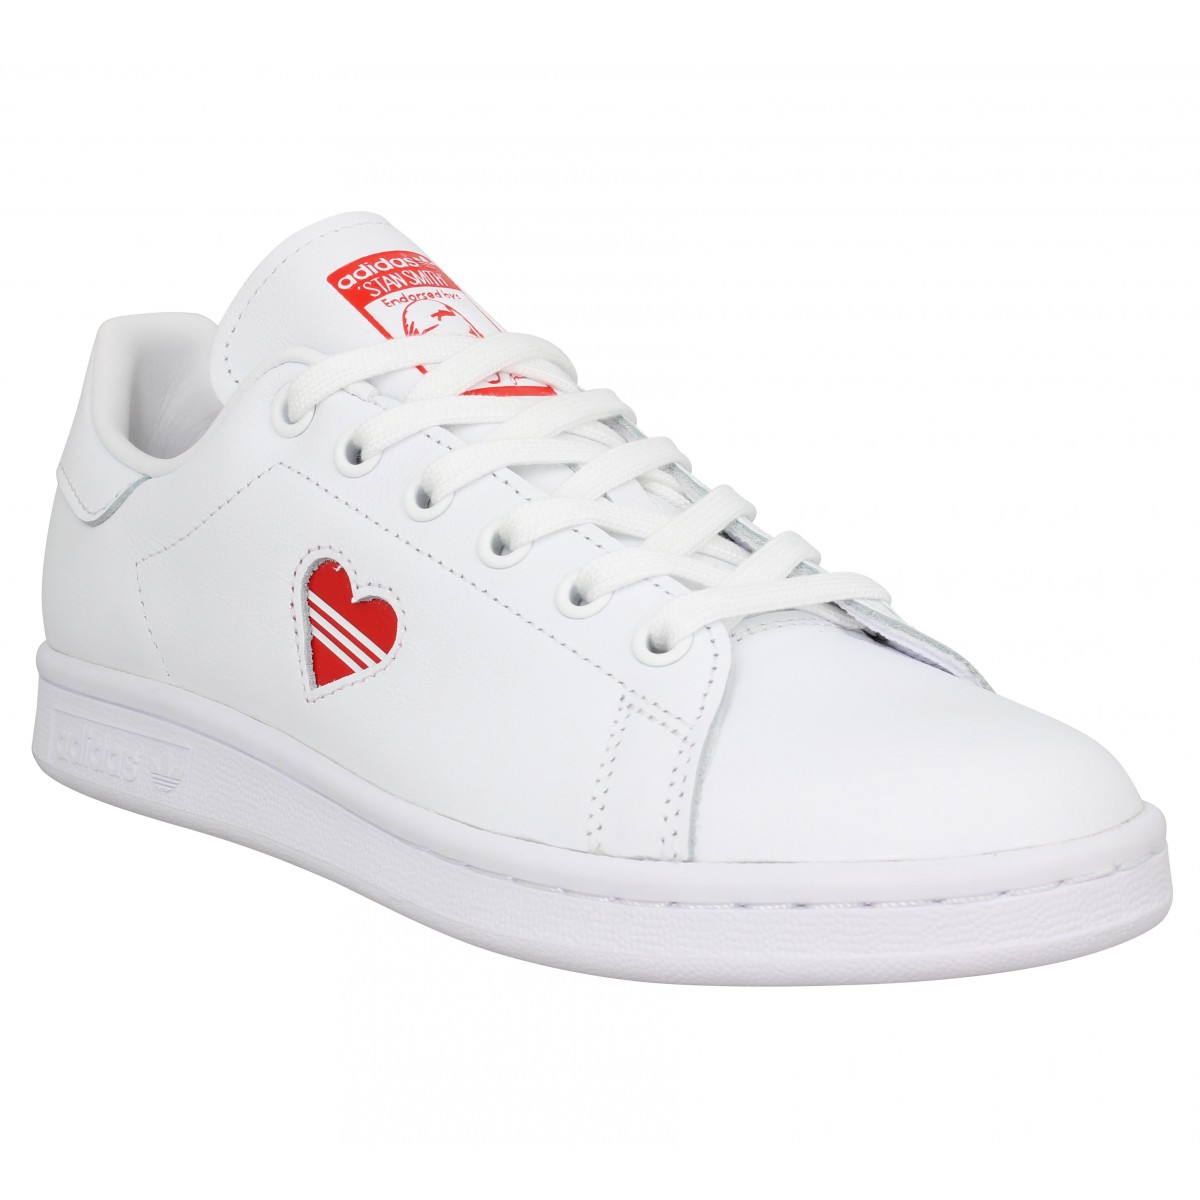 Adidas stan smith cuir femme blanc rouge femme | Fanny chaussures